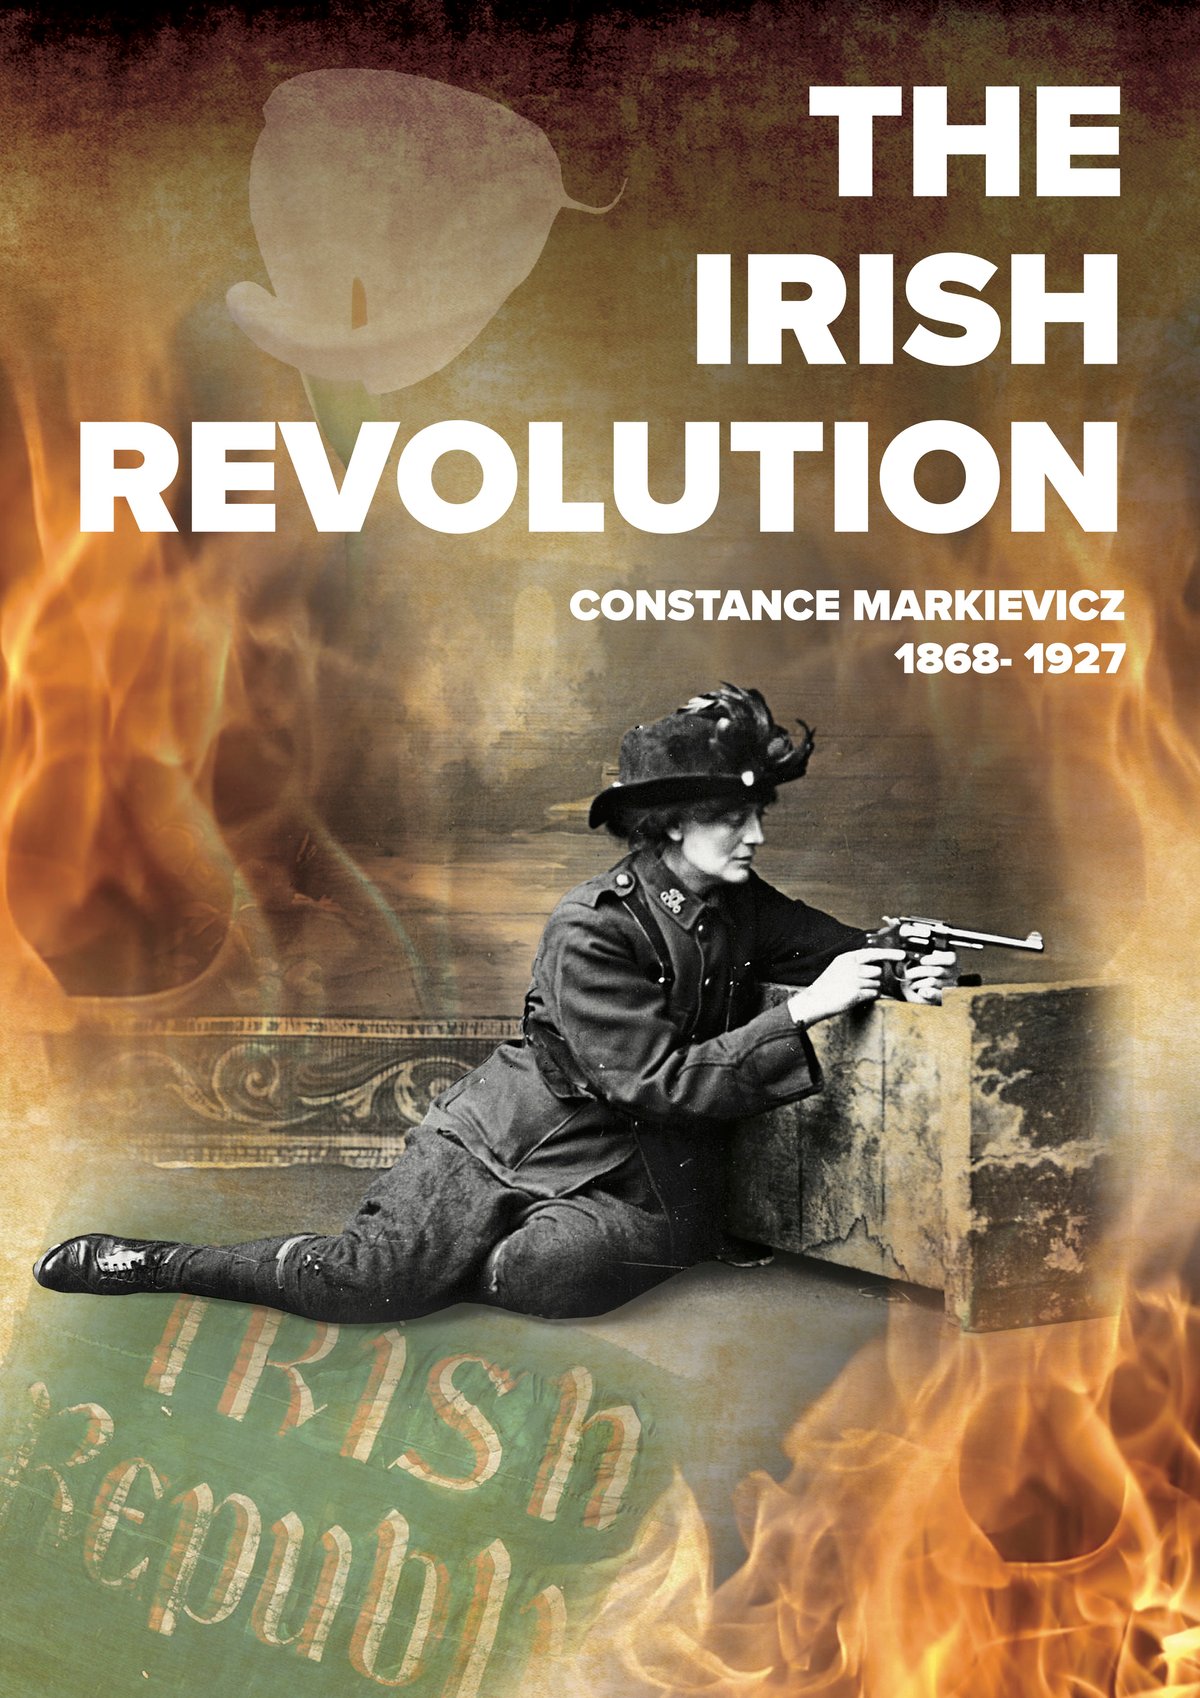 Image of Constance Markievicz Poster 